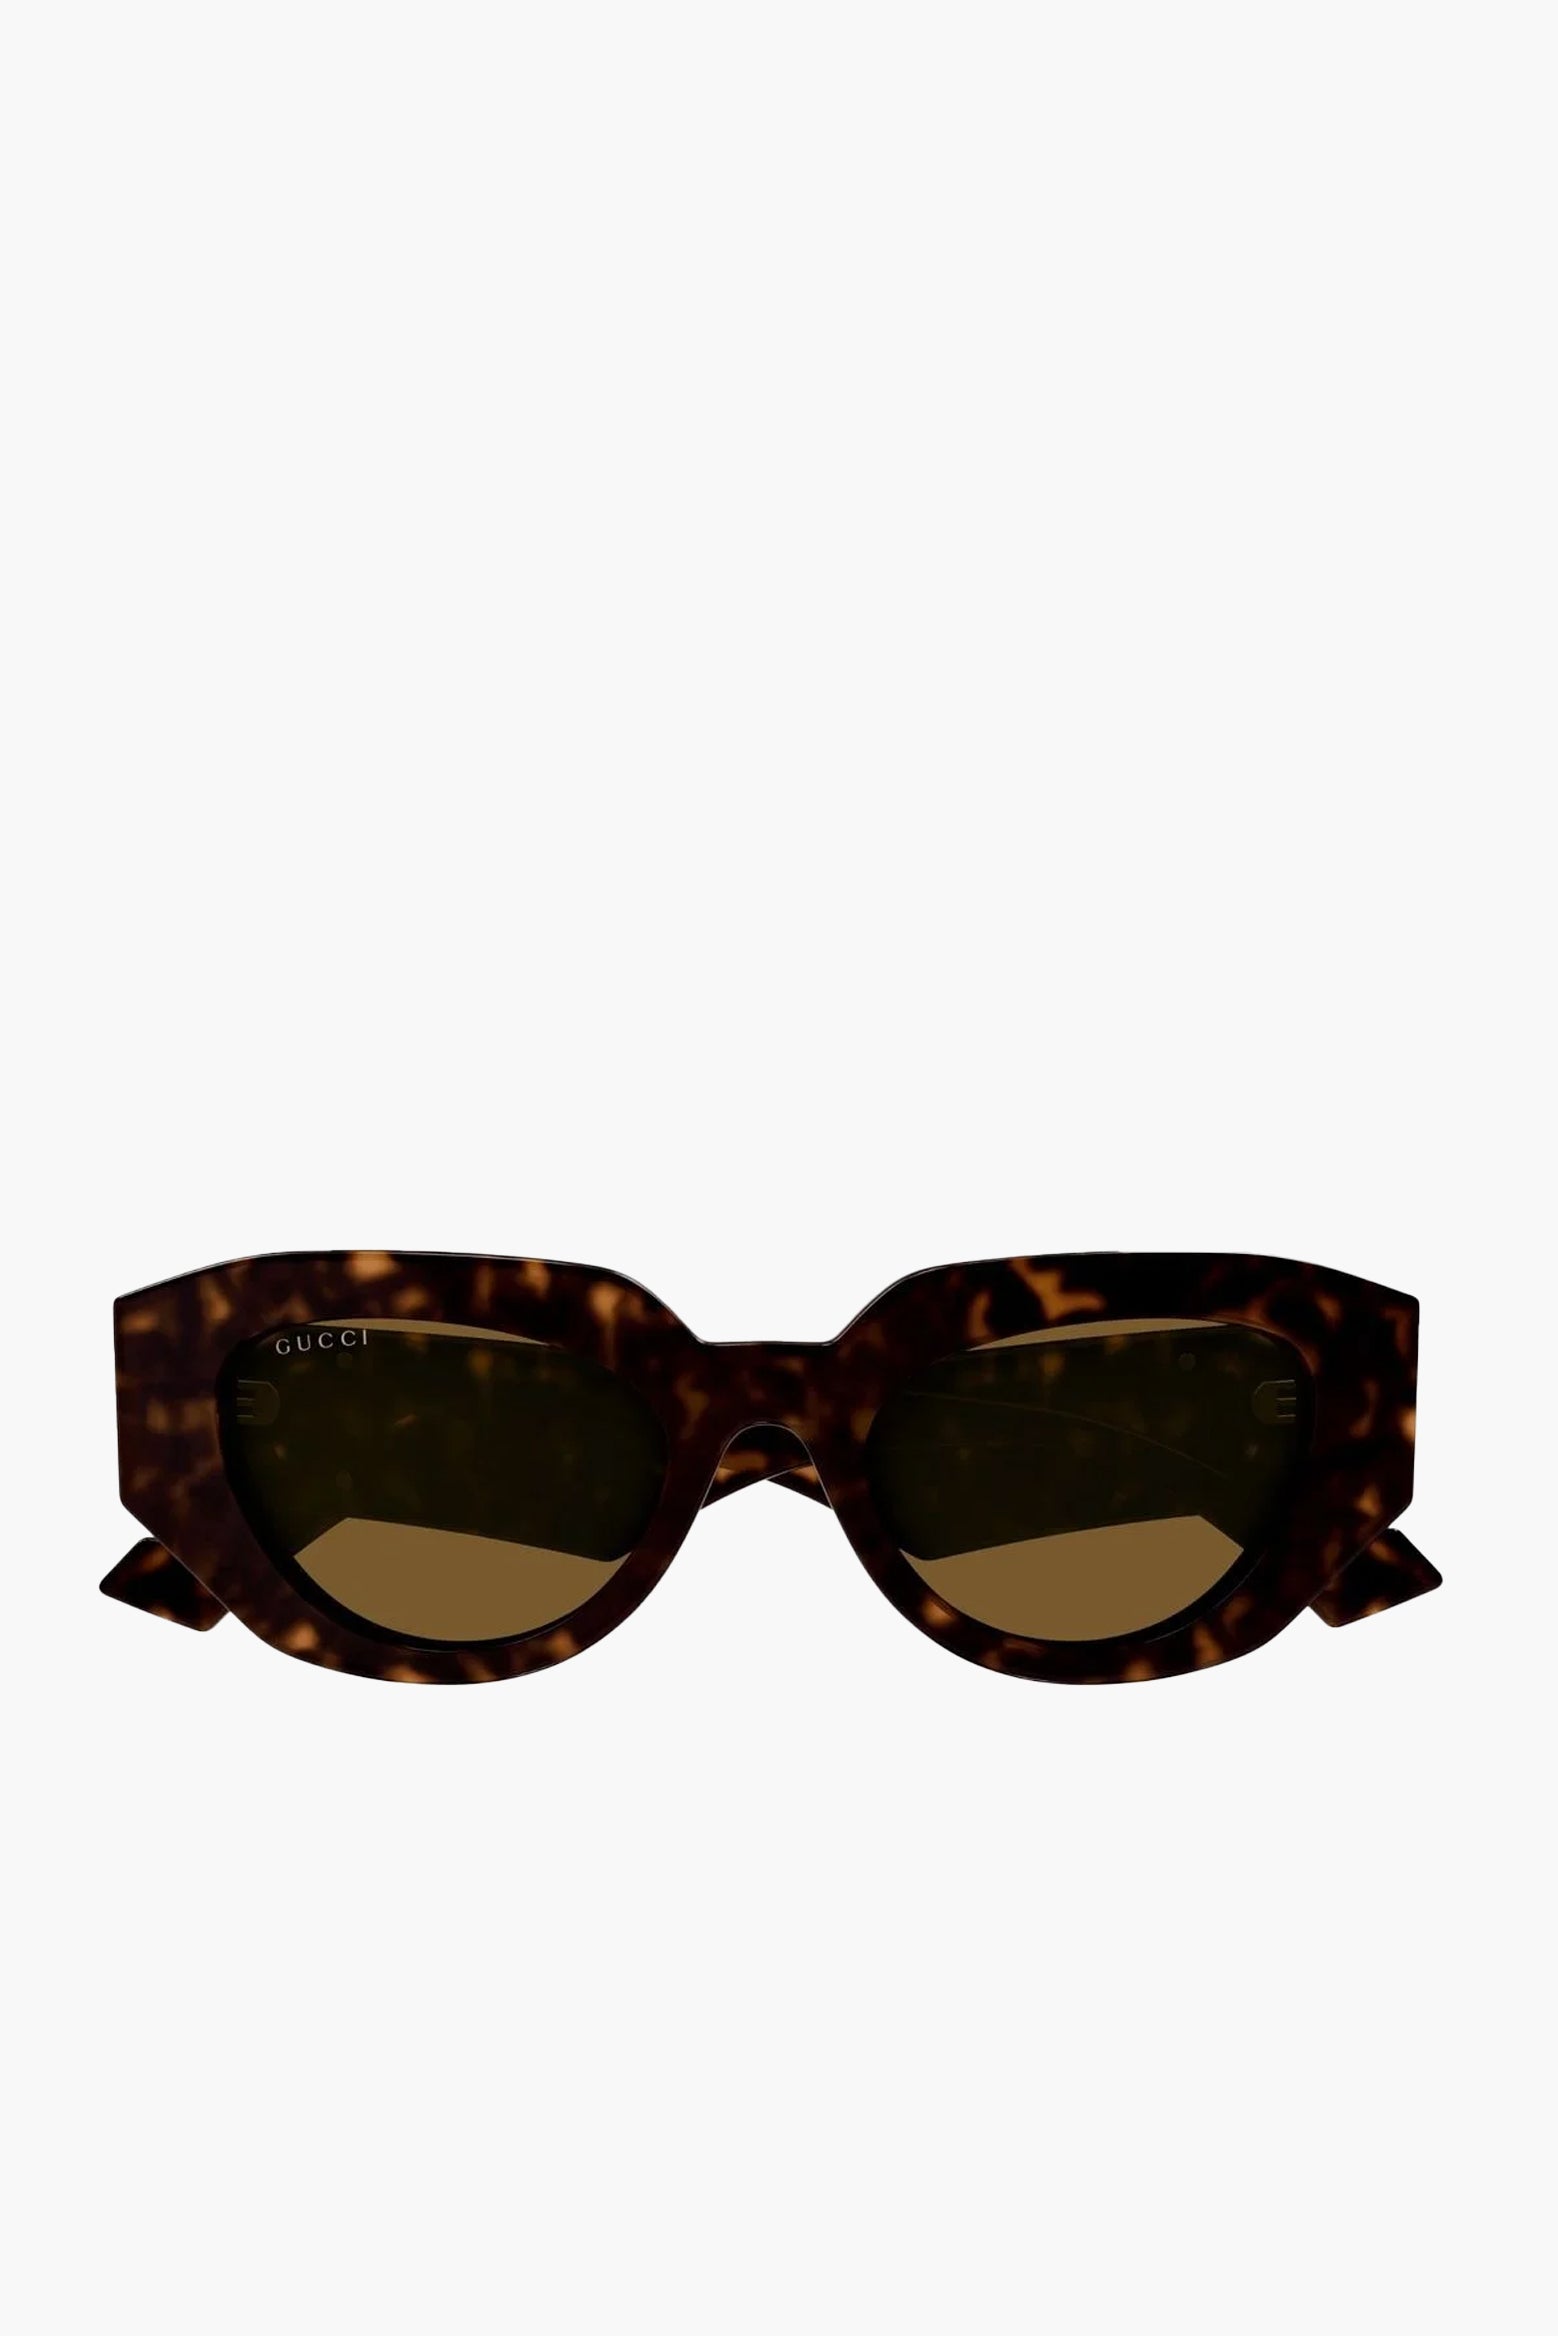 Gucci Geometric Frame Sunglasses in Tortoiseshell available at The New Trend Australia.